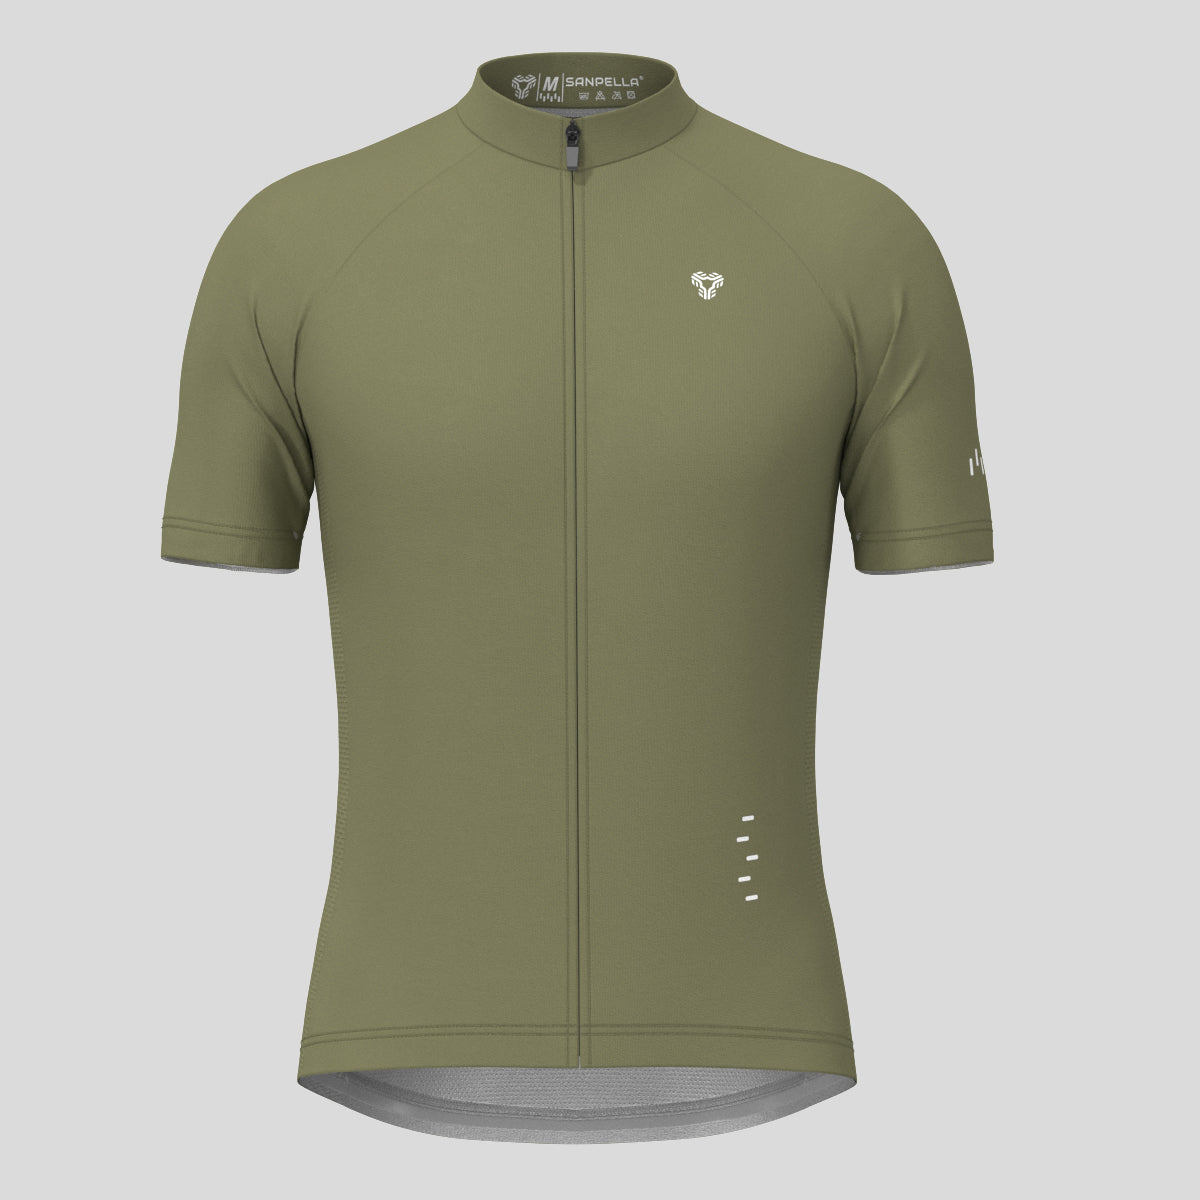 Men's Minimal Solid Cycling Jersey -Olive